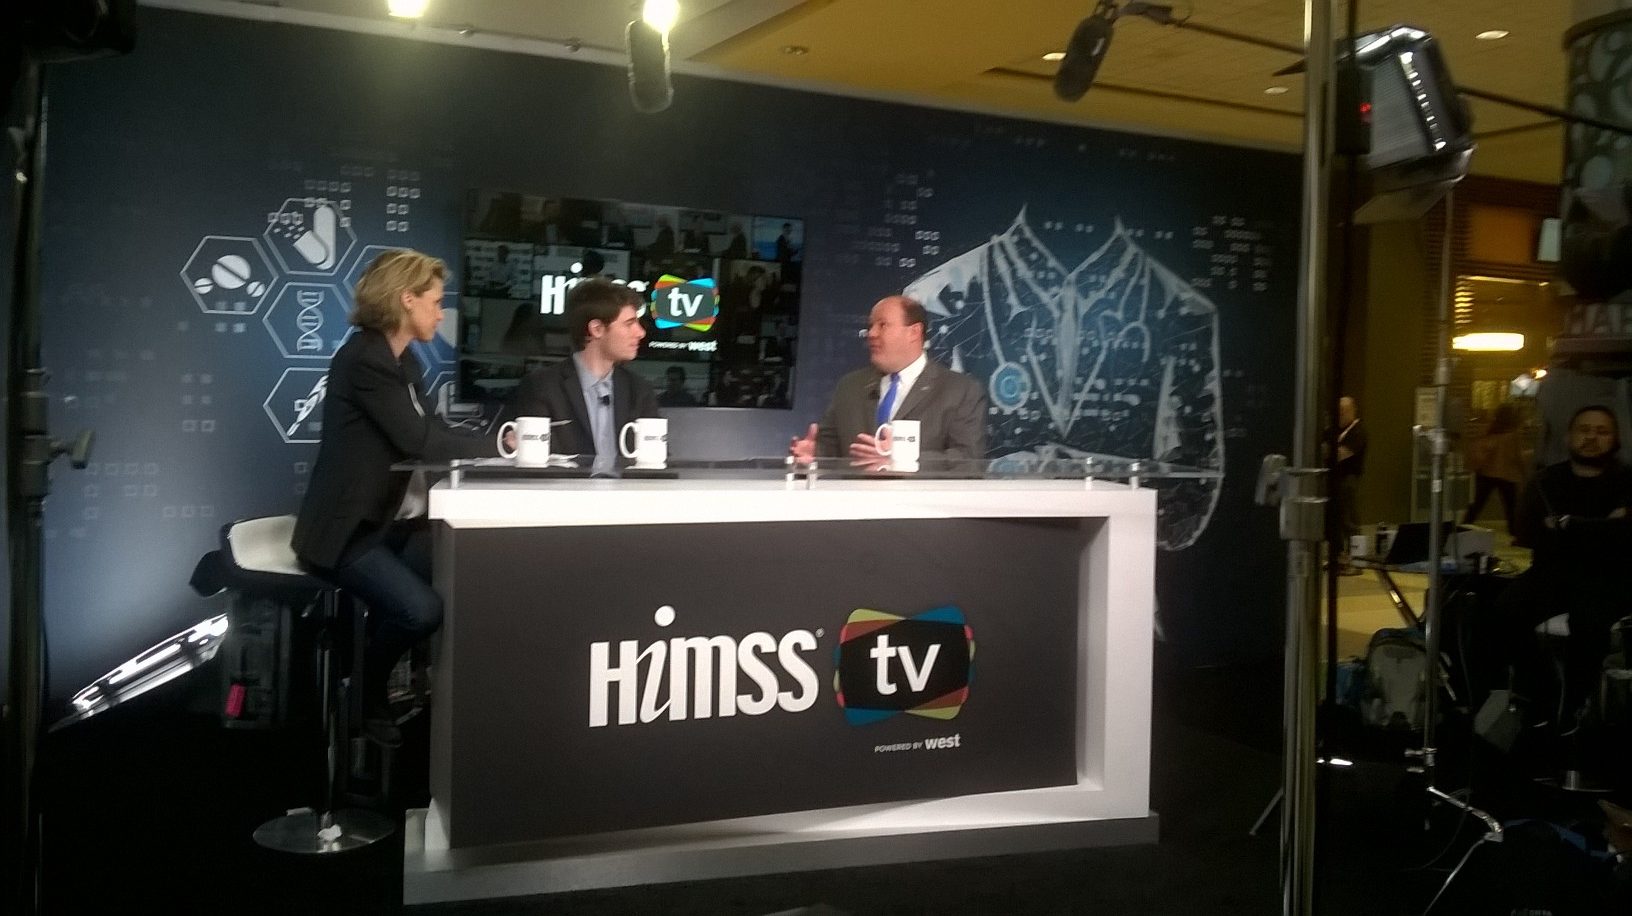 Brian on HIMSS TV